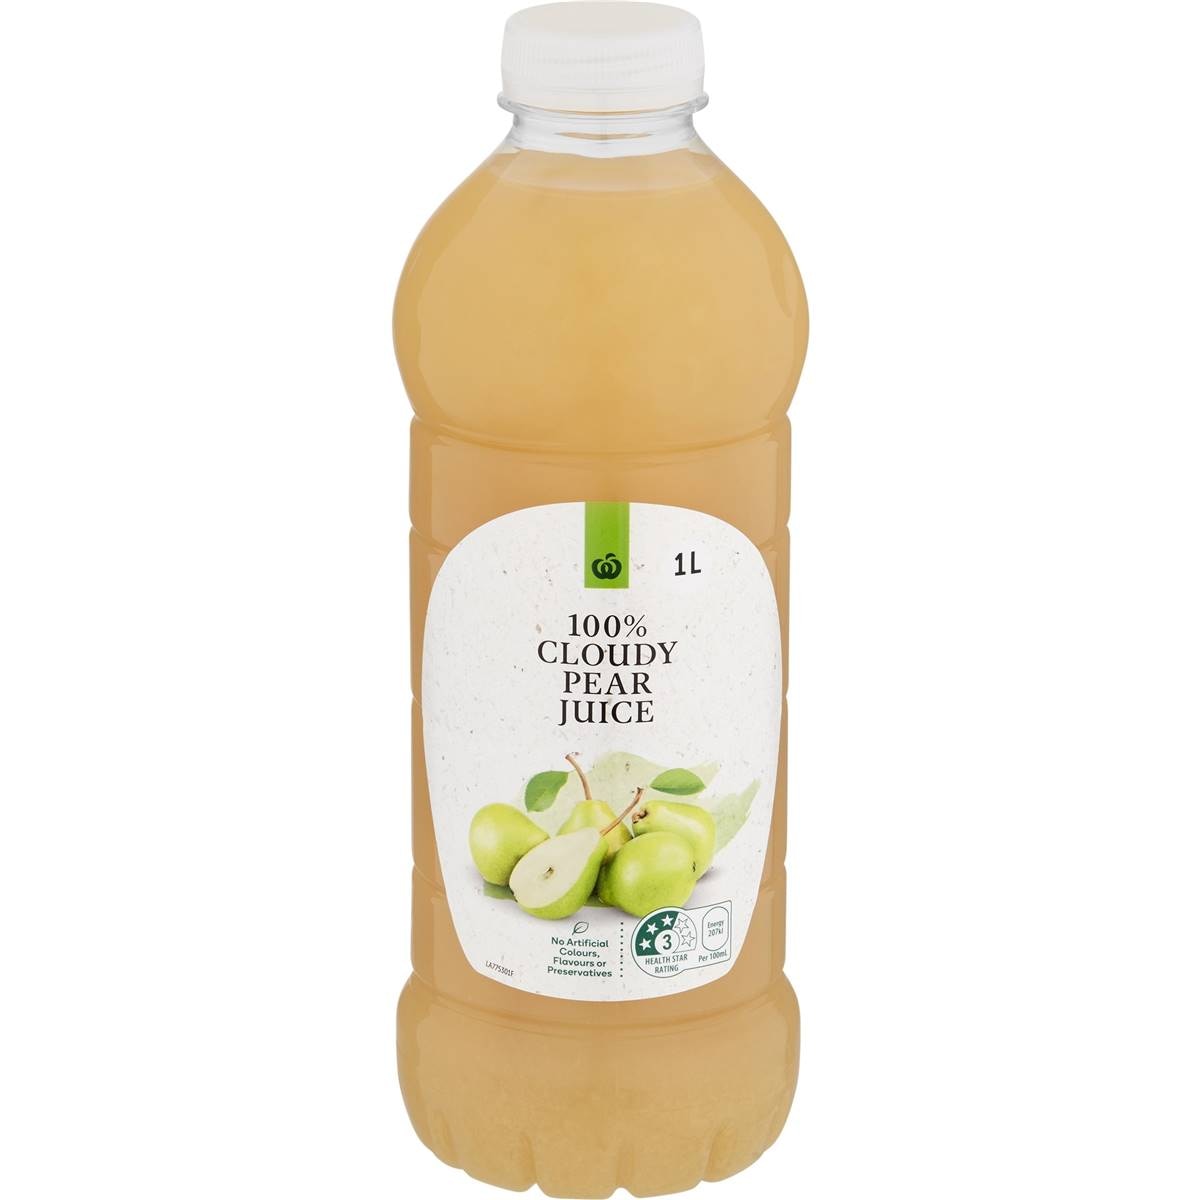 Calories in Woolworths 100% Cloudy Pear Juice